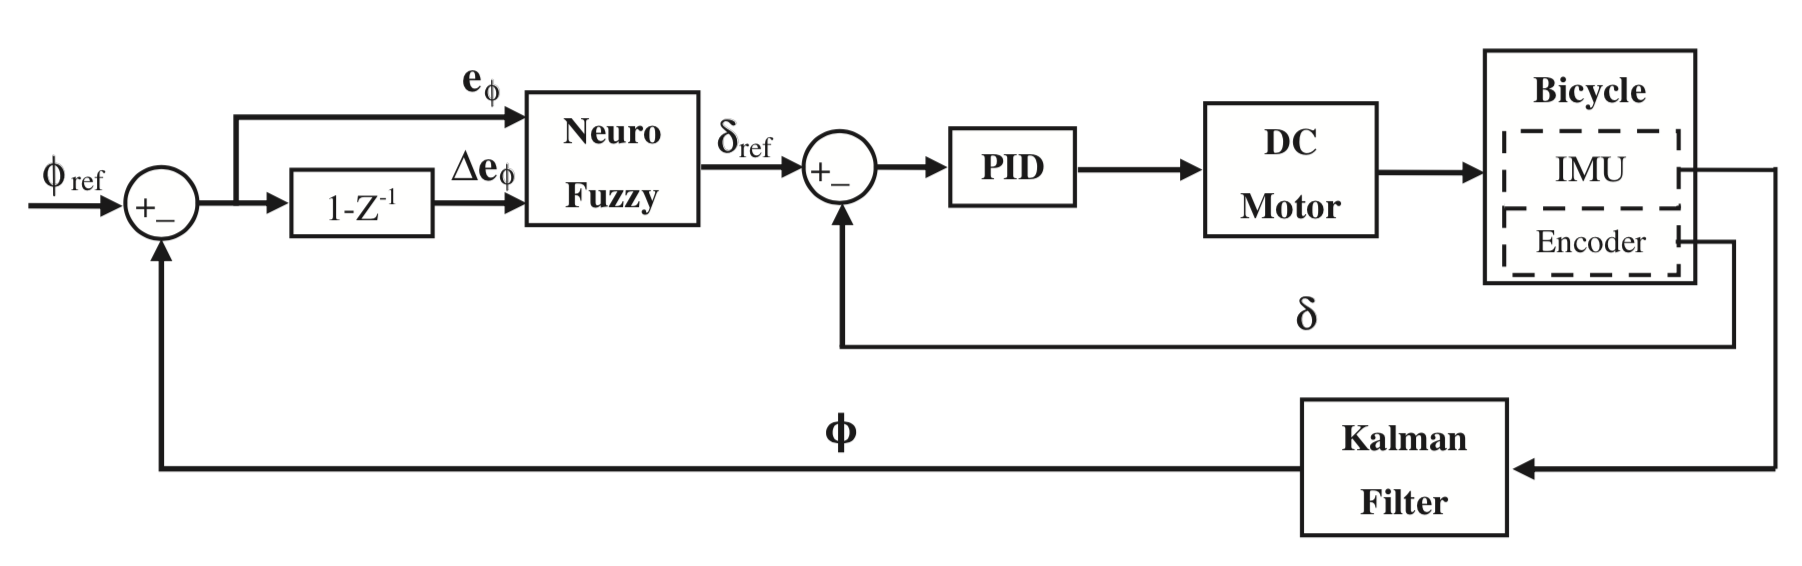 Design and Implementation of an Adaptive Critic-Based Neuro-Fuzzy Controller on an unmanned bicycle